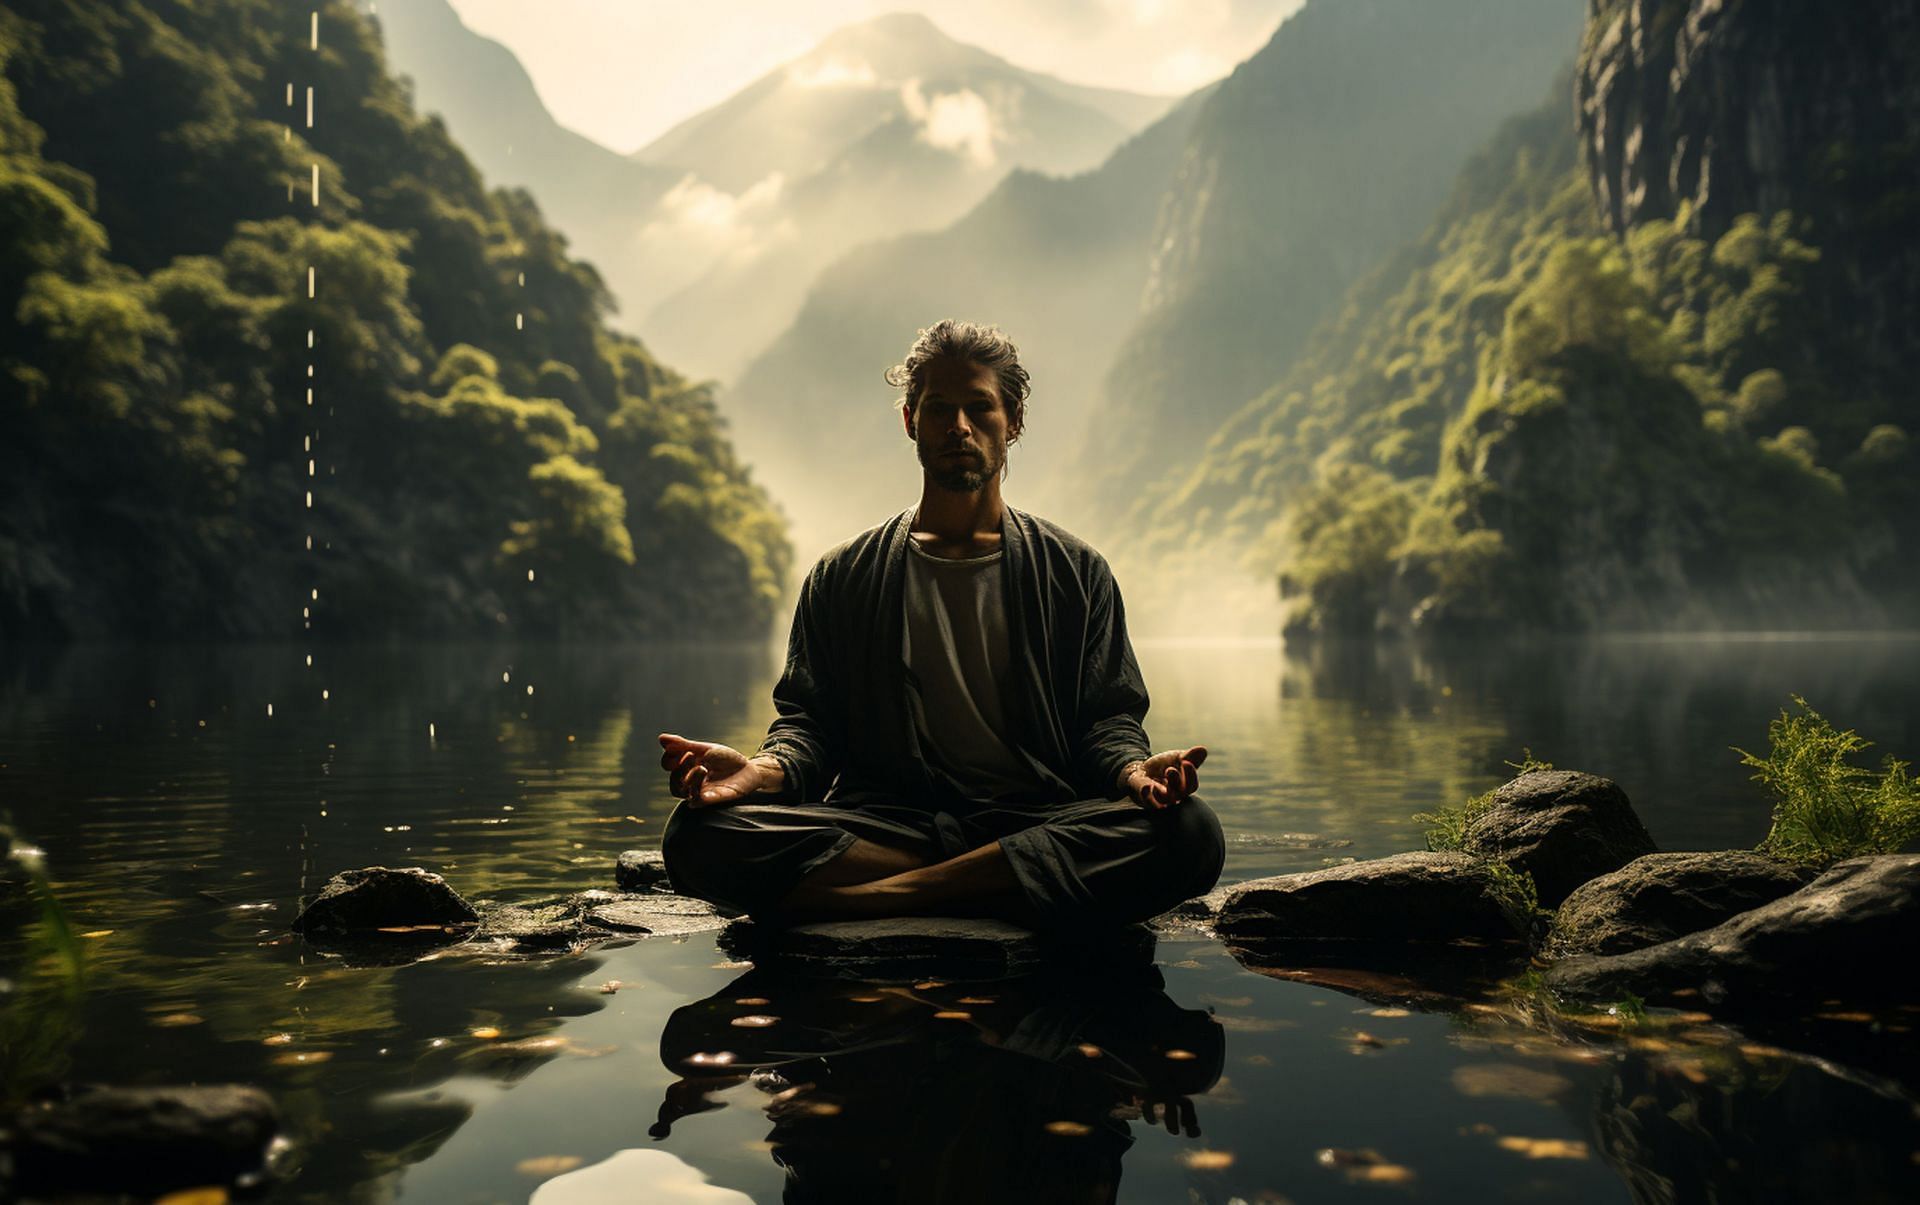 Meditating at night can help you relax and provide much better sleep (Image via Vecteezy)